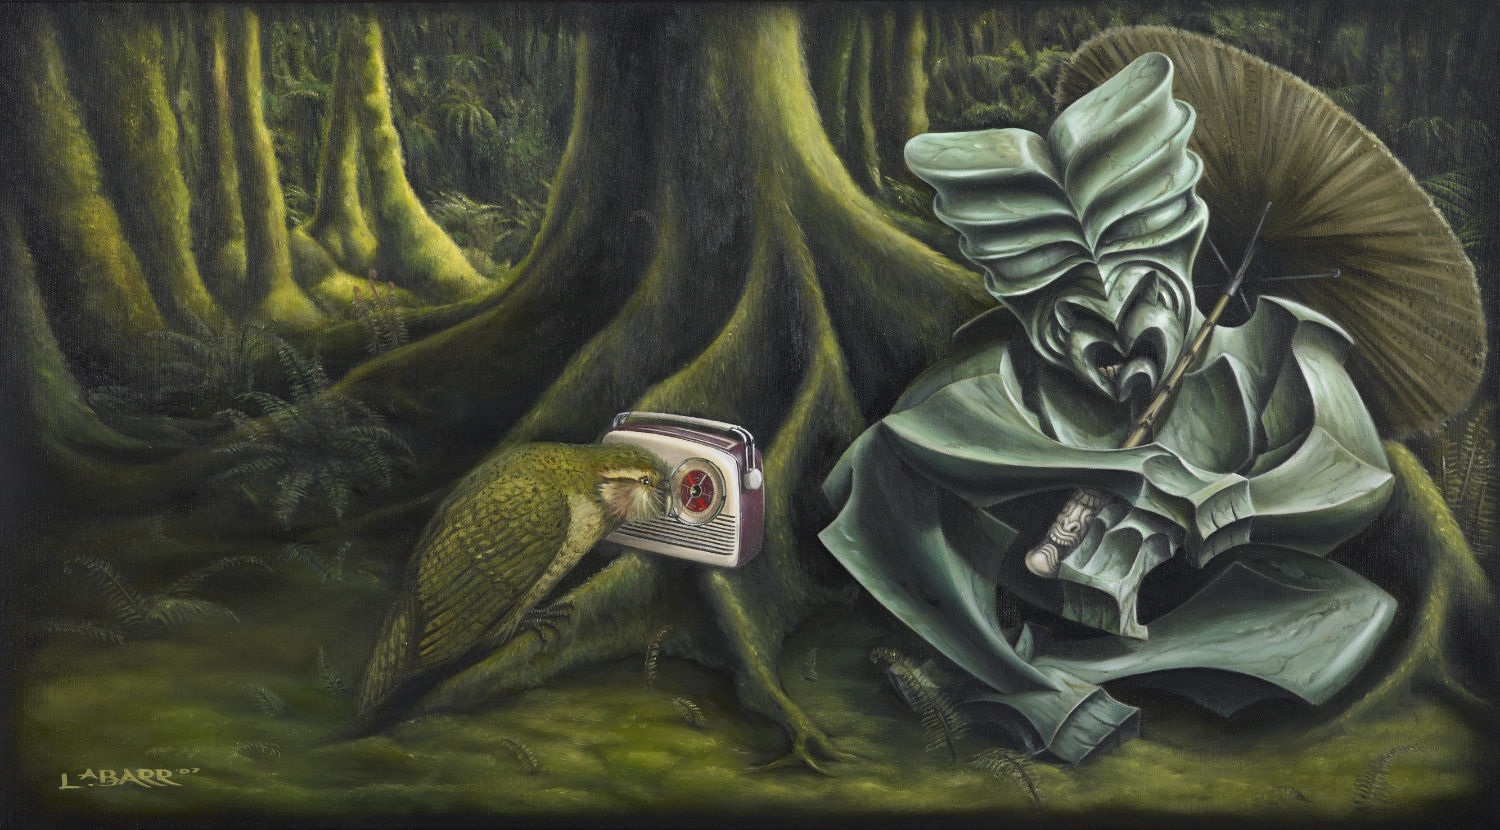 Tiki figure listens to radio with kākāpō as he sits in the forest, painting from Liam Barr